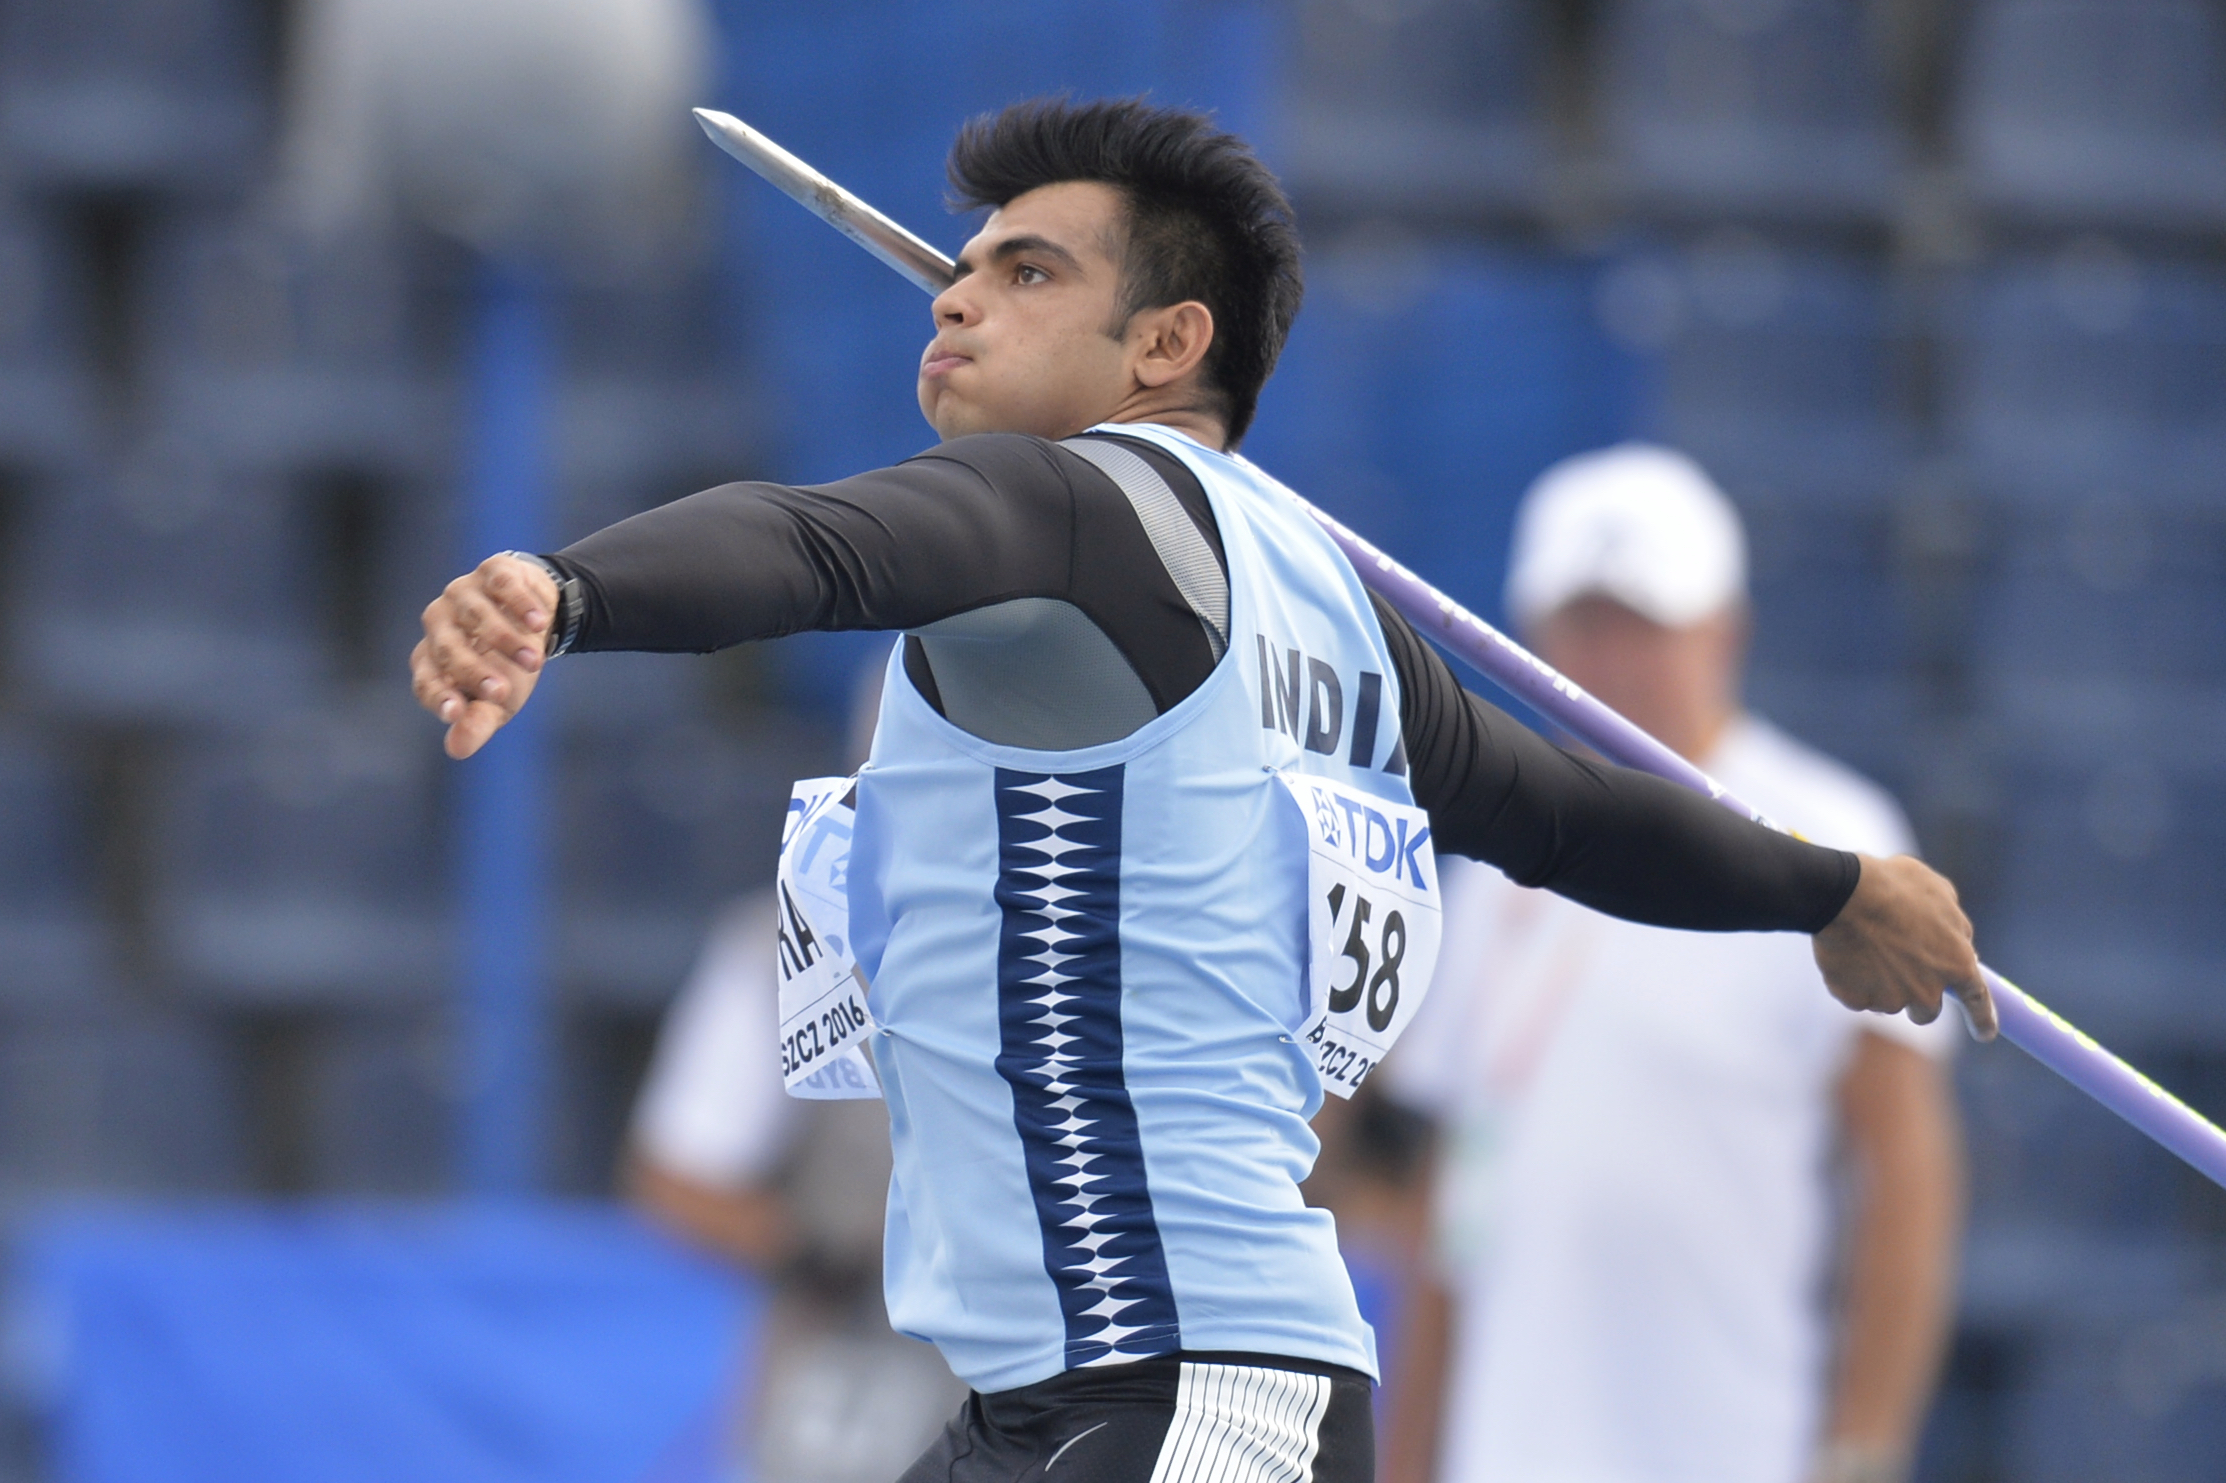 Neeraj Chopra resumes practice, two-and-a-half months after Tokyo triumph